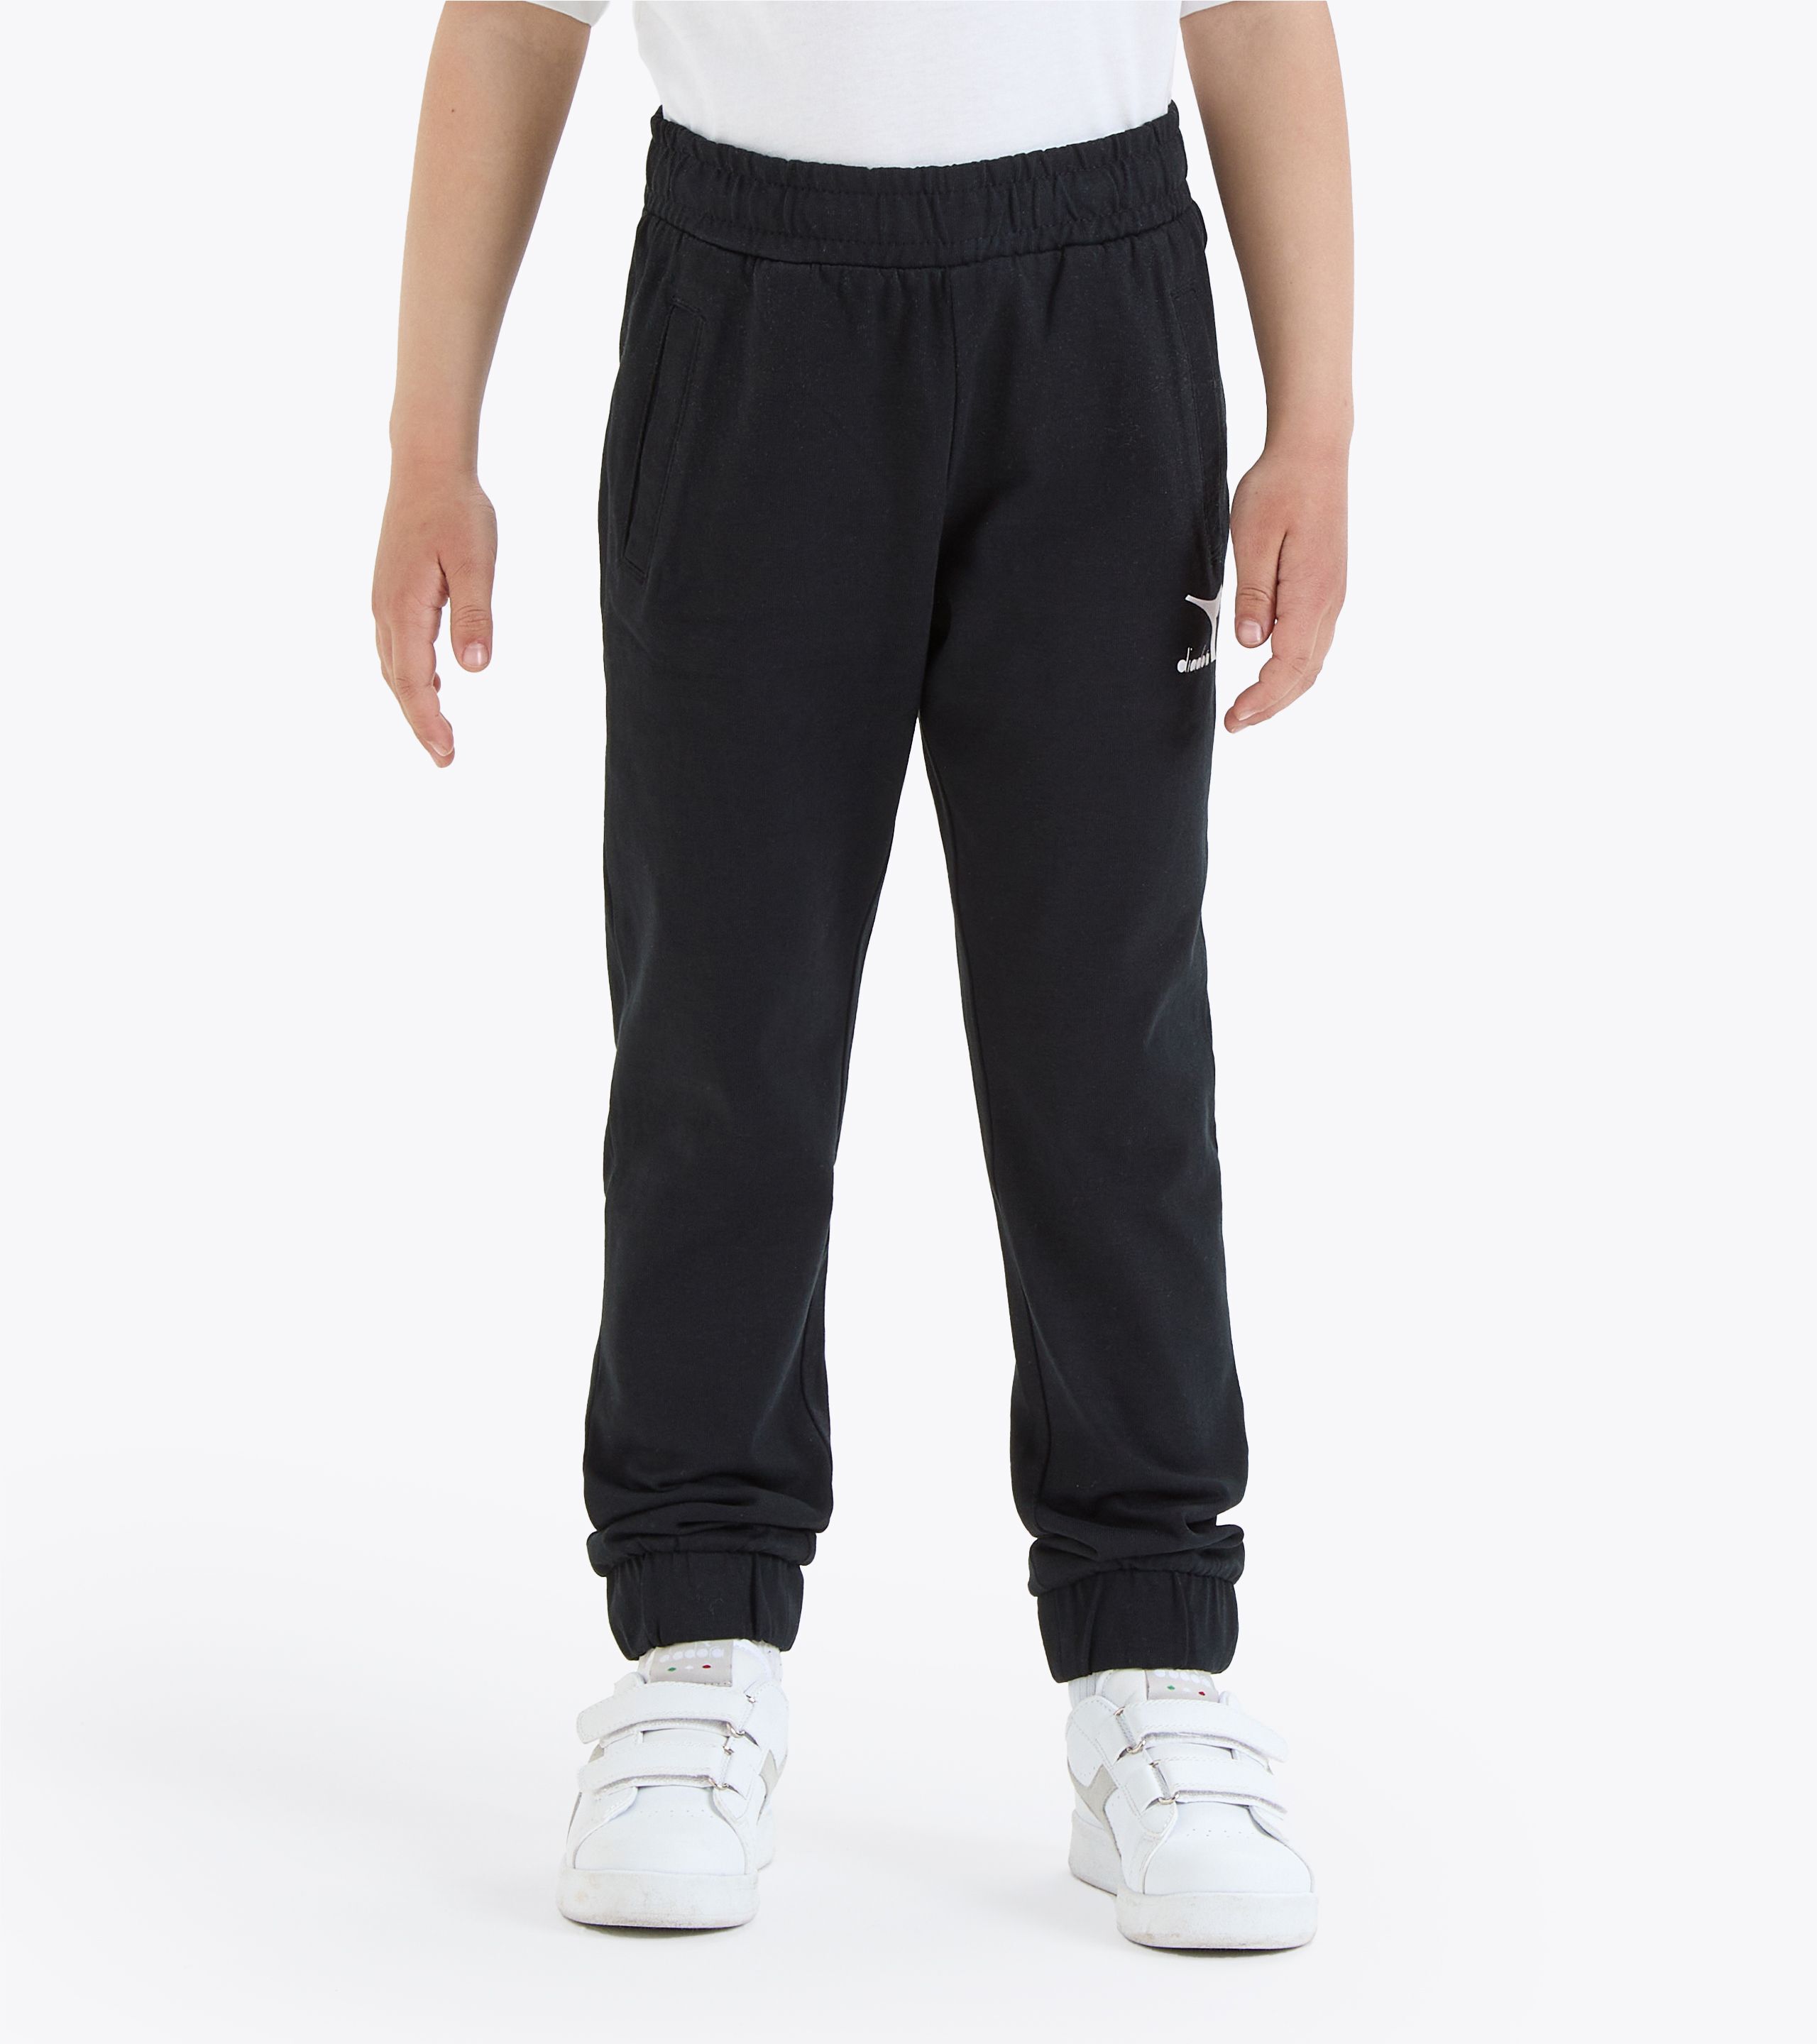 Reflective Print Sports Trousers for Men